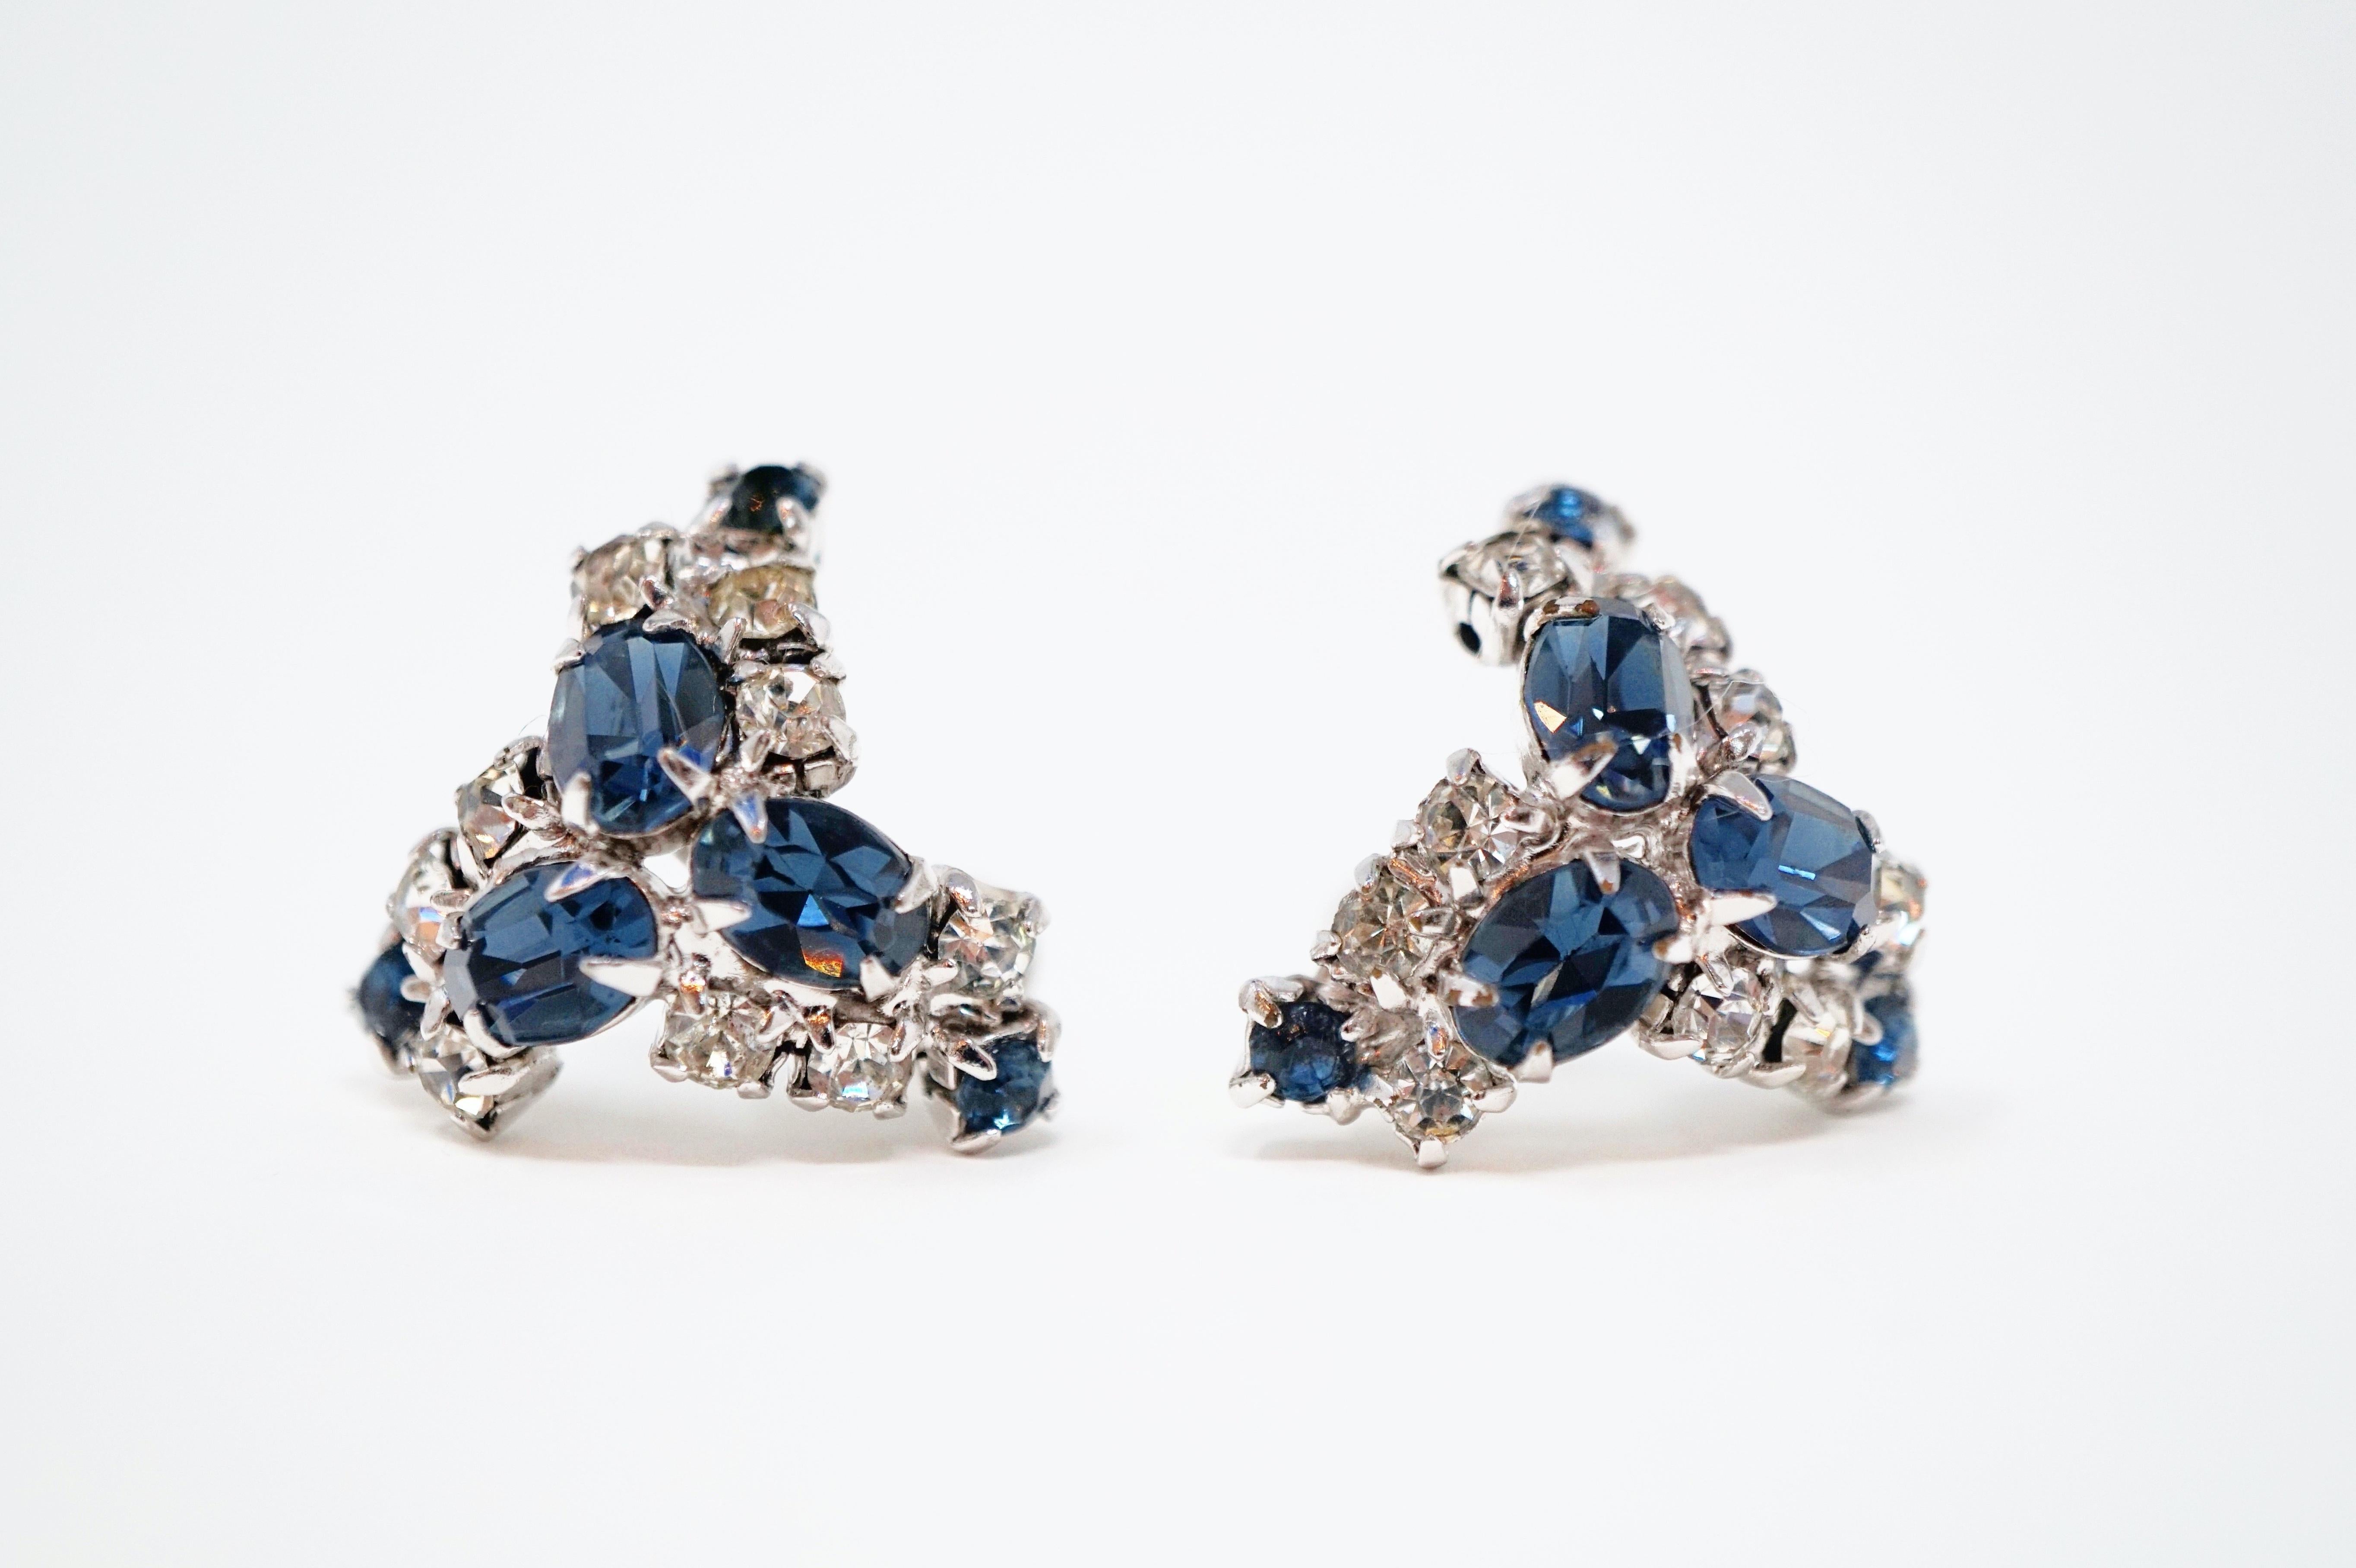 Absolutely gorgeous sparkling rhinestone earrings from the mid-century era, featuring faceted Sapphire-colored crystal rhinestones surrounded by clear crystal rhinestone pavé with silver tone hardware.

DETAILS:
- Screw back clip-on earring backs
-